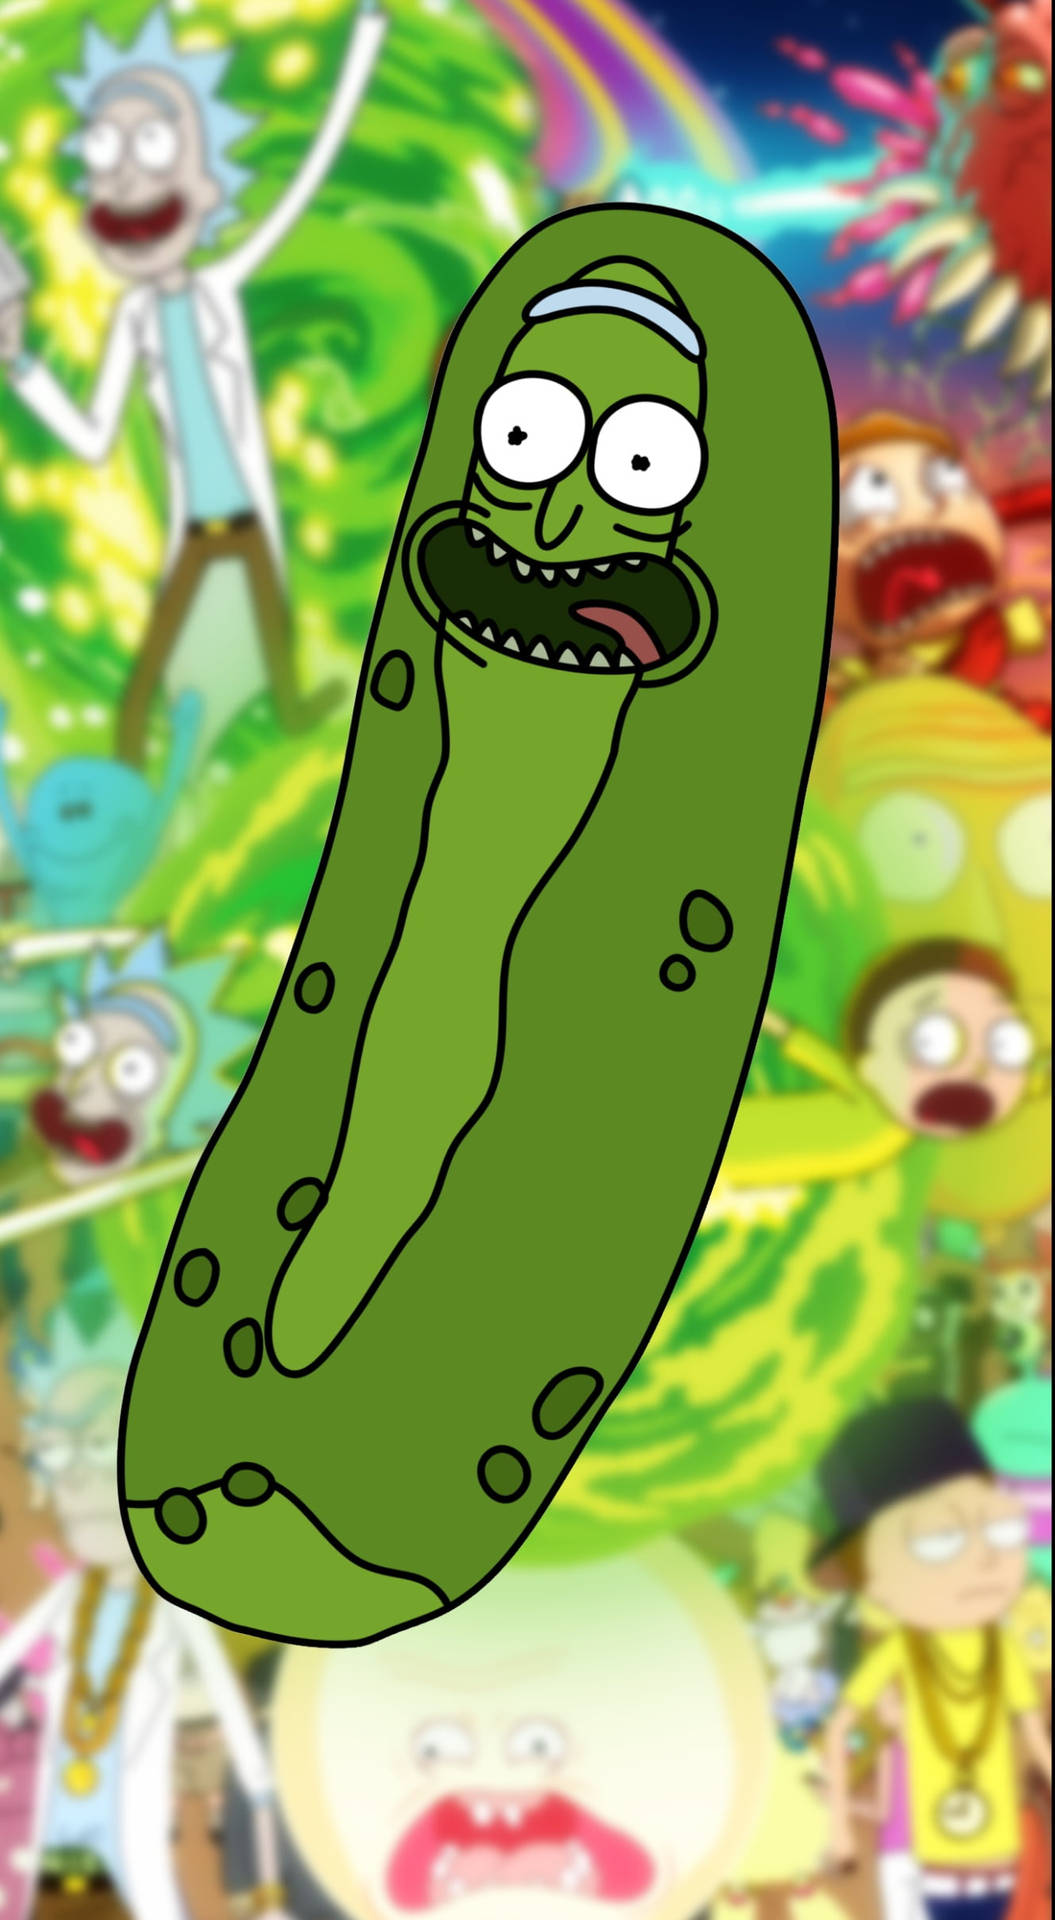 Pickle Rick Sticking Out Tongue Background